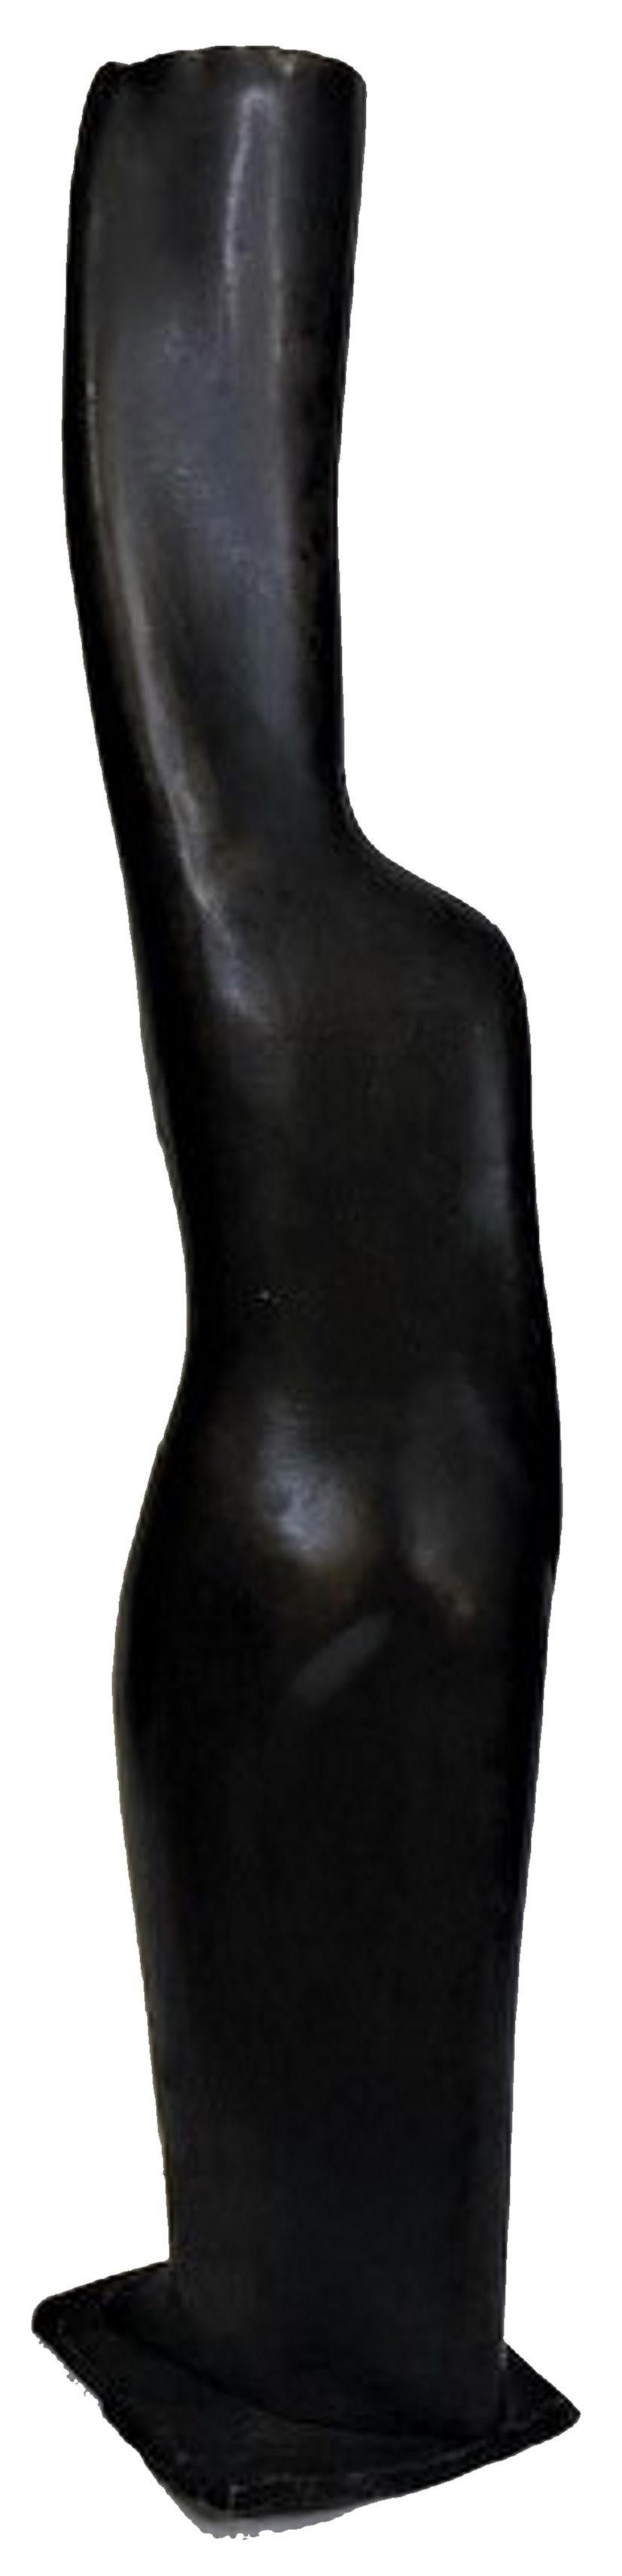 French Modernist Abstract Bronze Sculpture of a Woman Carrying a Vessel, c. 1960 For Sale 1